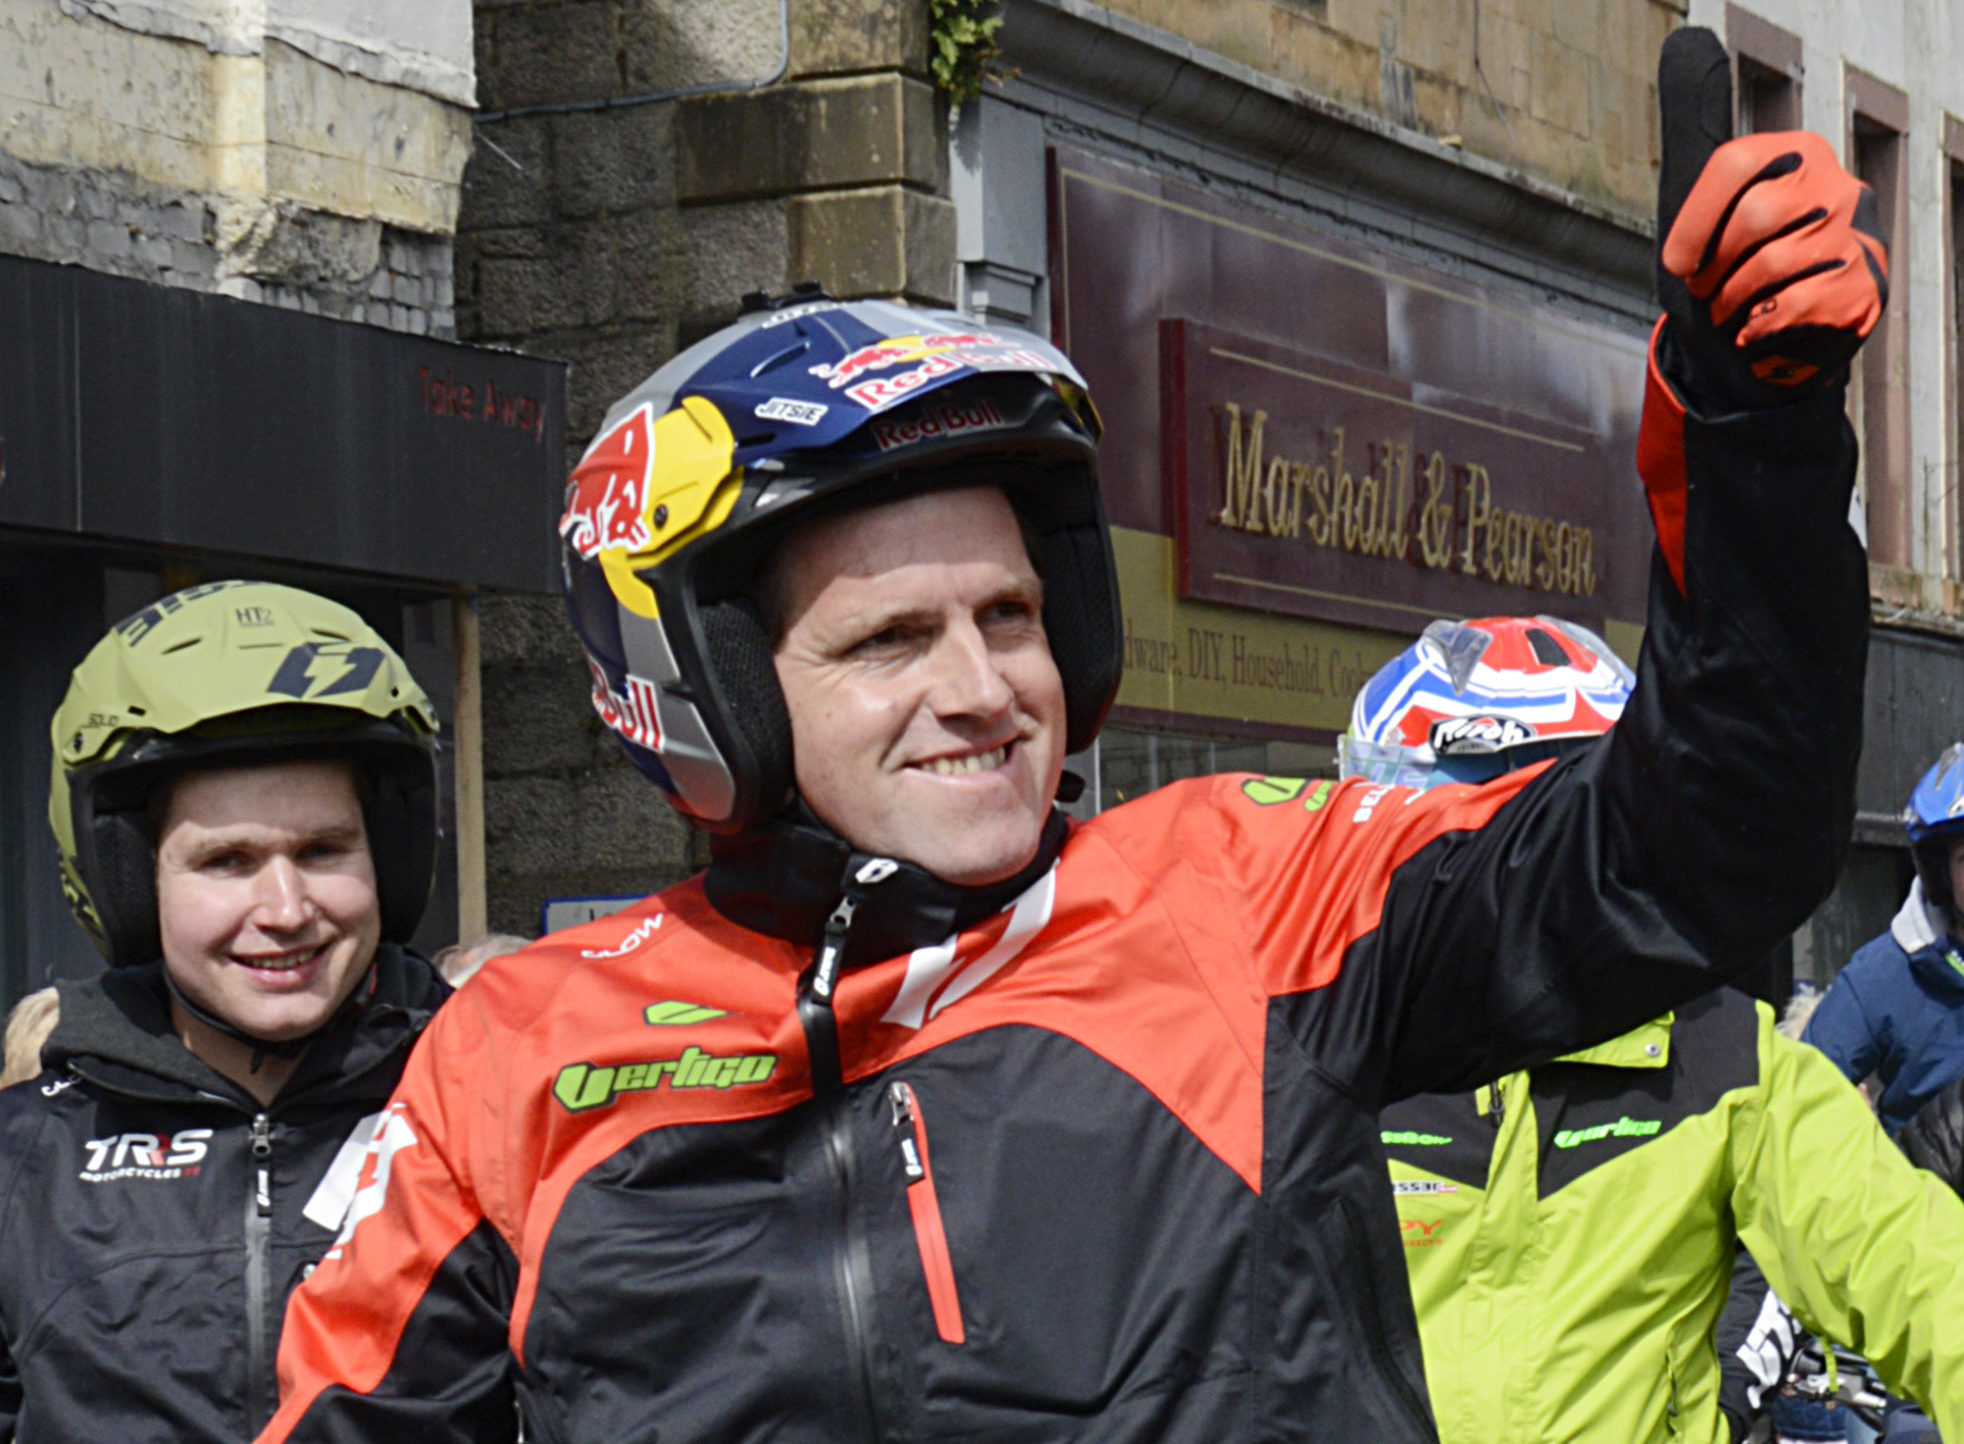 Current champion and 2019 favourite, Dougie Lampkin gives a thumbs up to cheering fans.
Picture: Iain Ferguson, The Write Image.